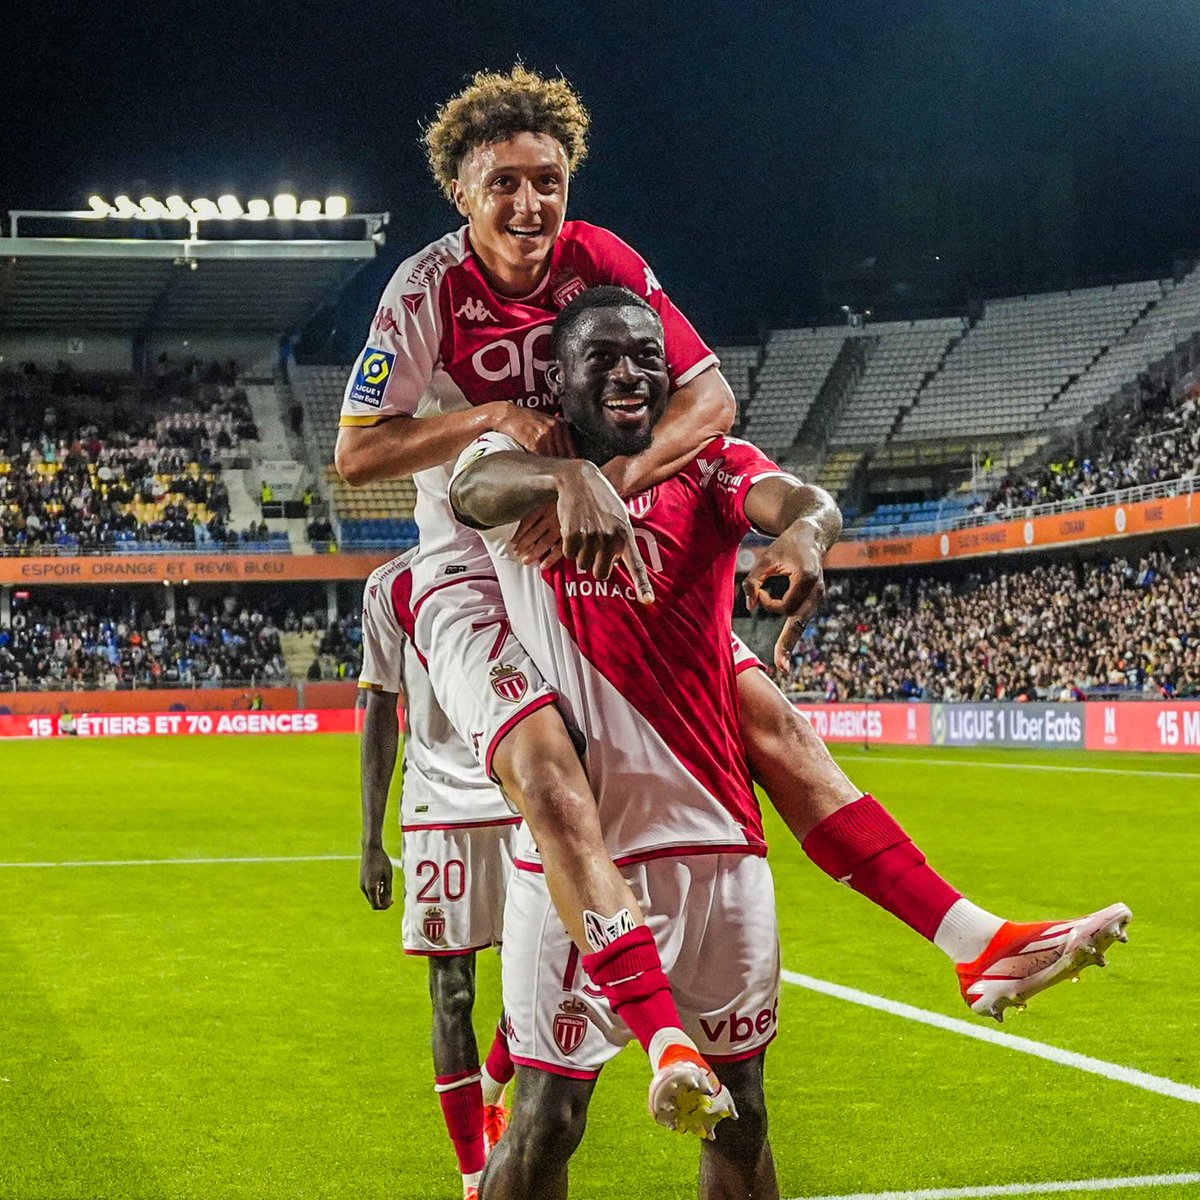 🚨🇲🇨 𝐎𝐅𝐅𝐈𝐂𝐈𝐀𝐋 | AS Monaco have QUALIFIED for the Champions League next season! ✅

They are back in the competition for the first time since the 2018/19 season. 

Congratulations to Adolf Hütter and his team. 👏